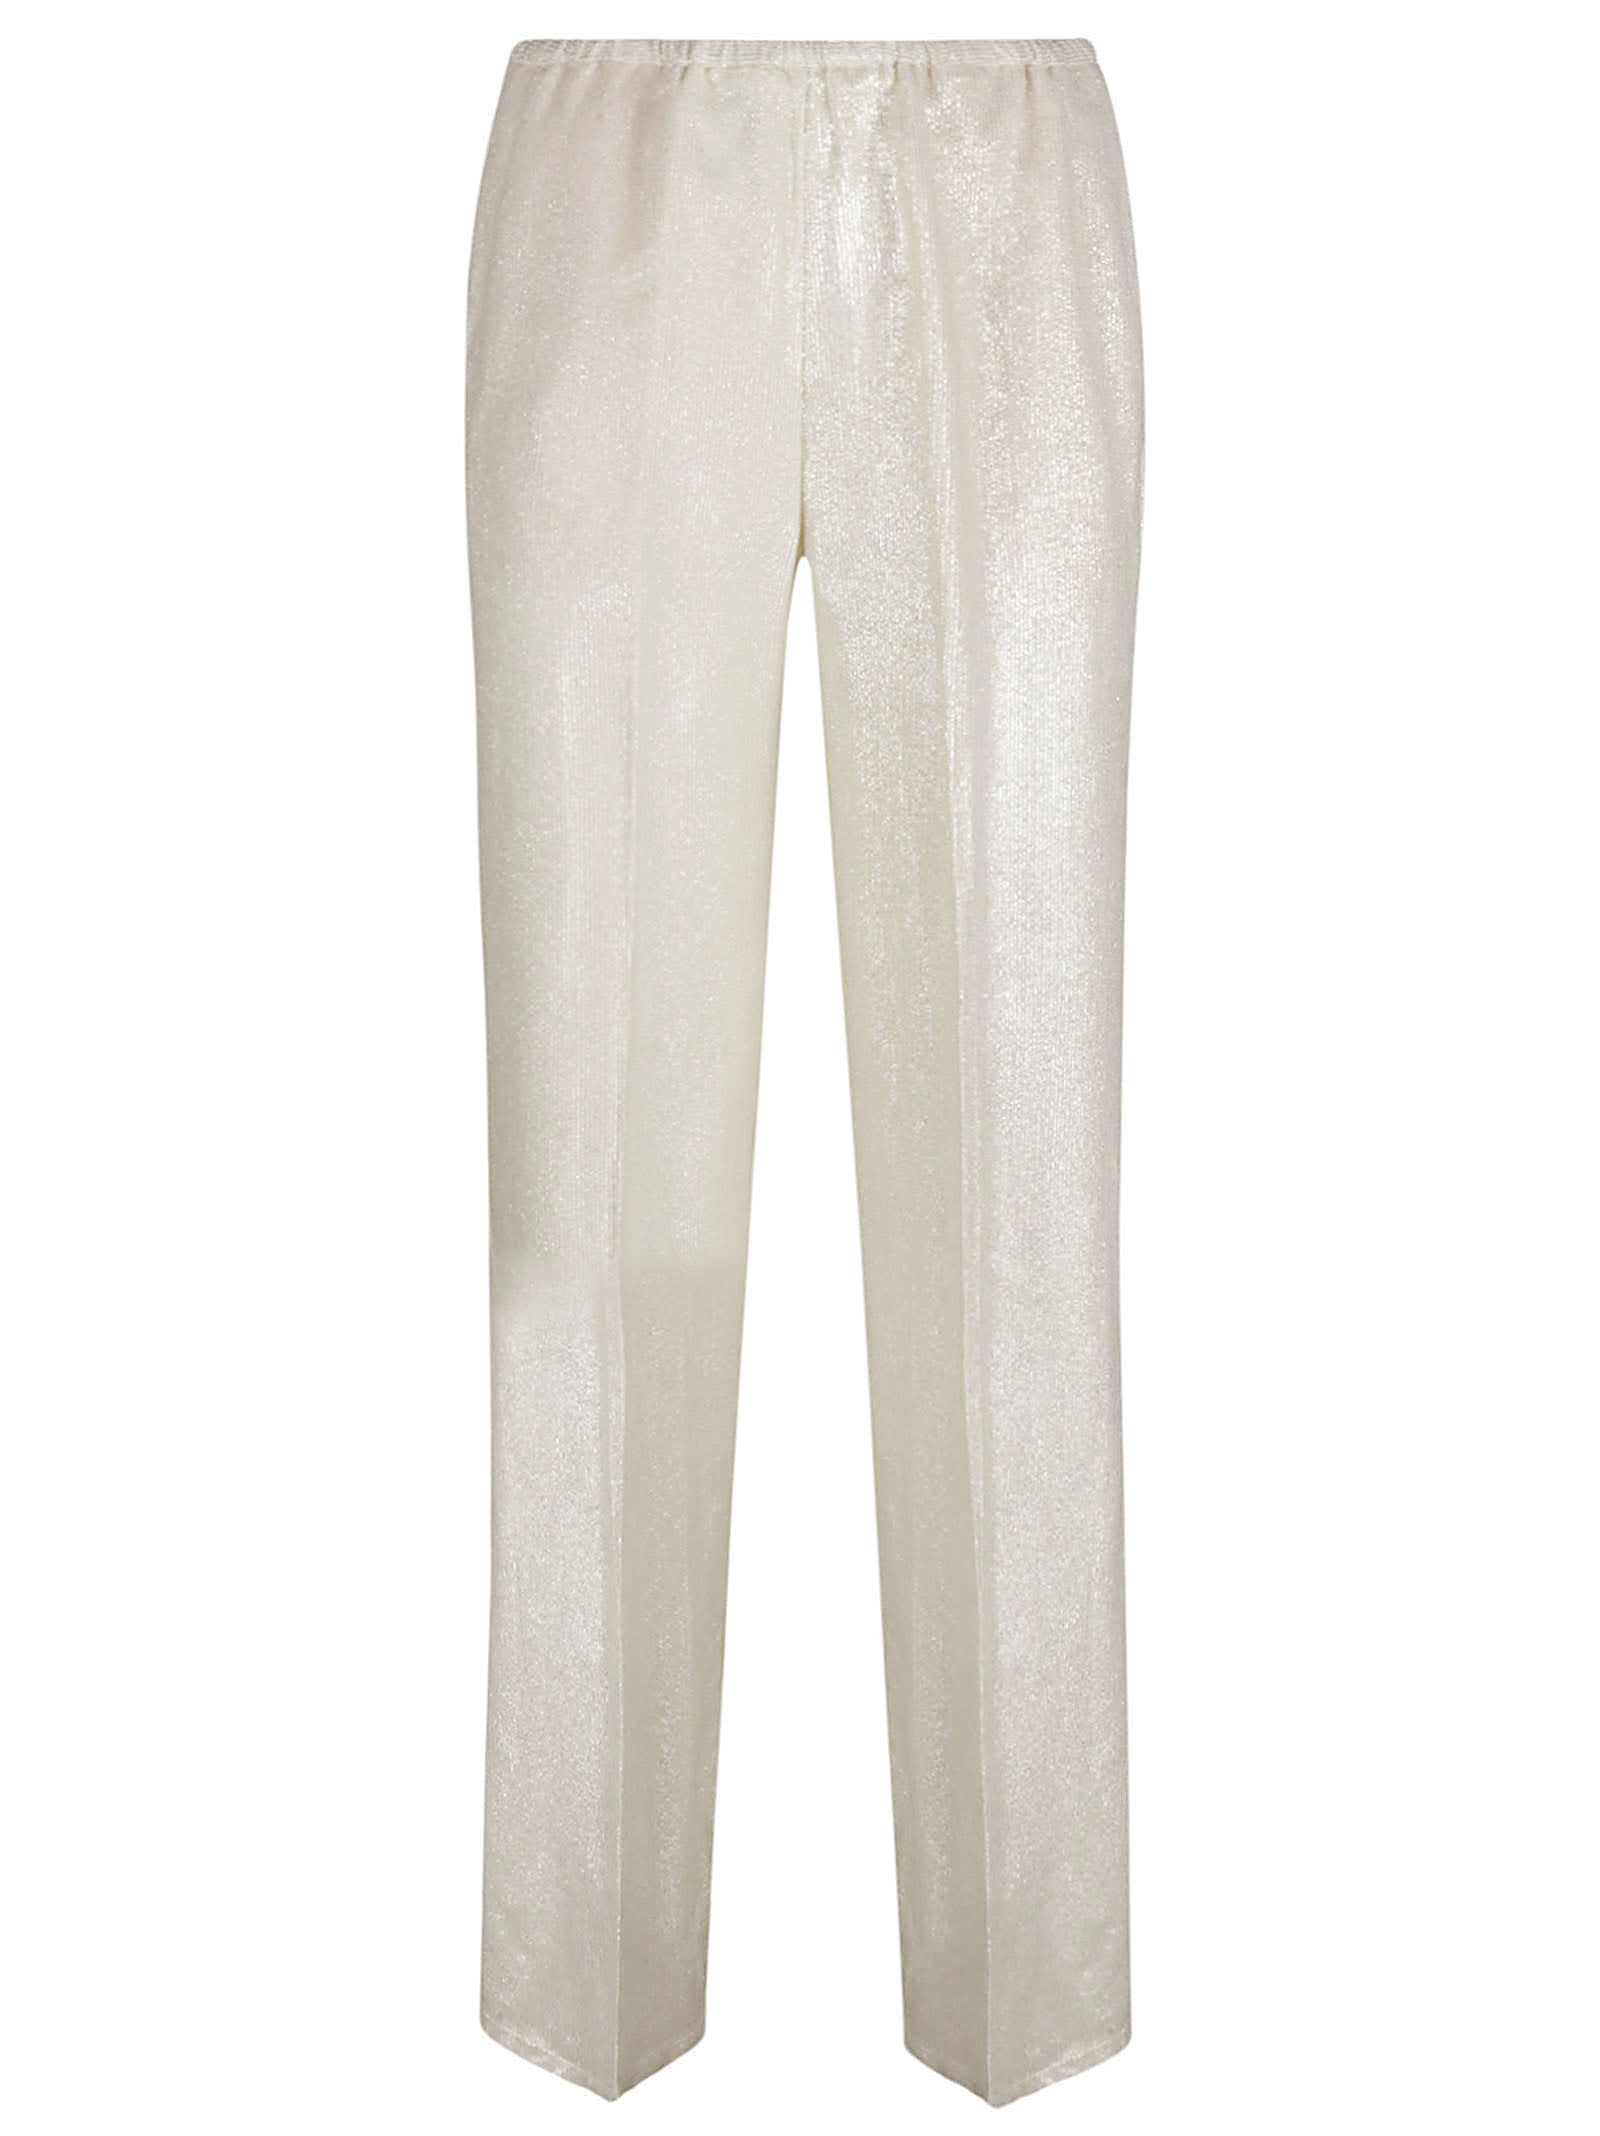 FORTE FORTE RIBBED WAIST GLITTERY TROUSERS